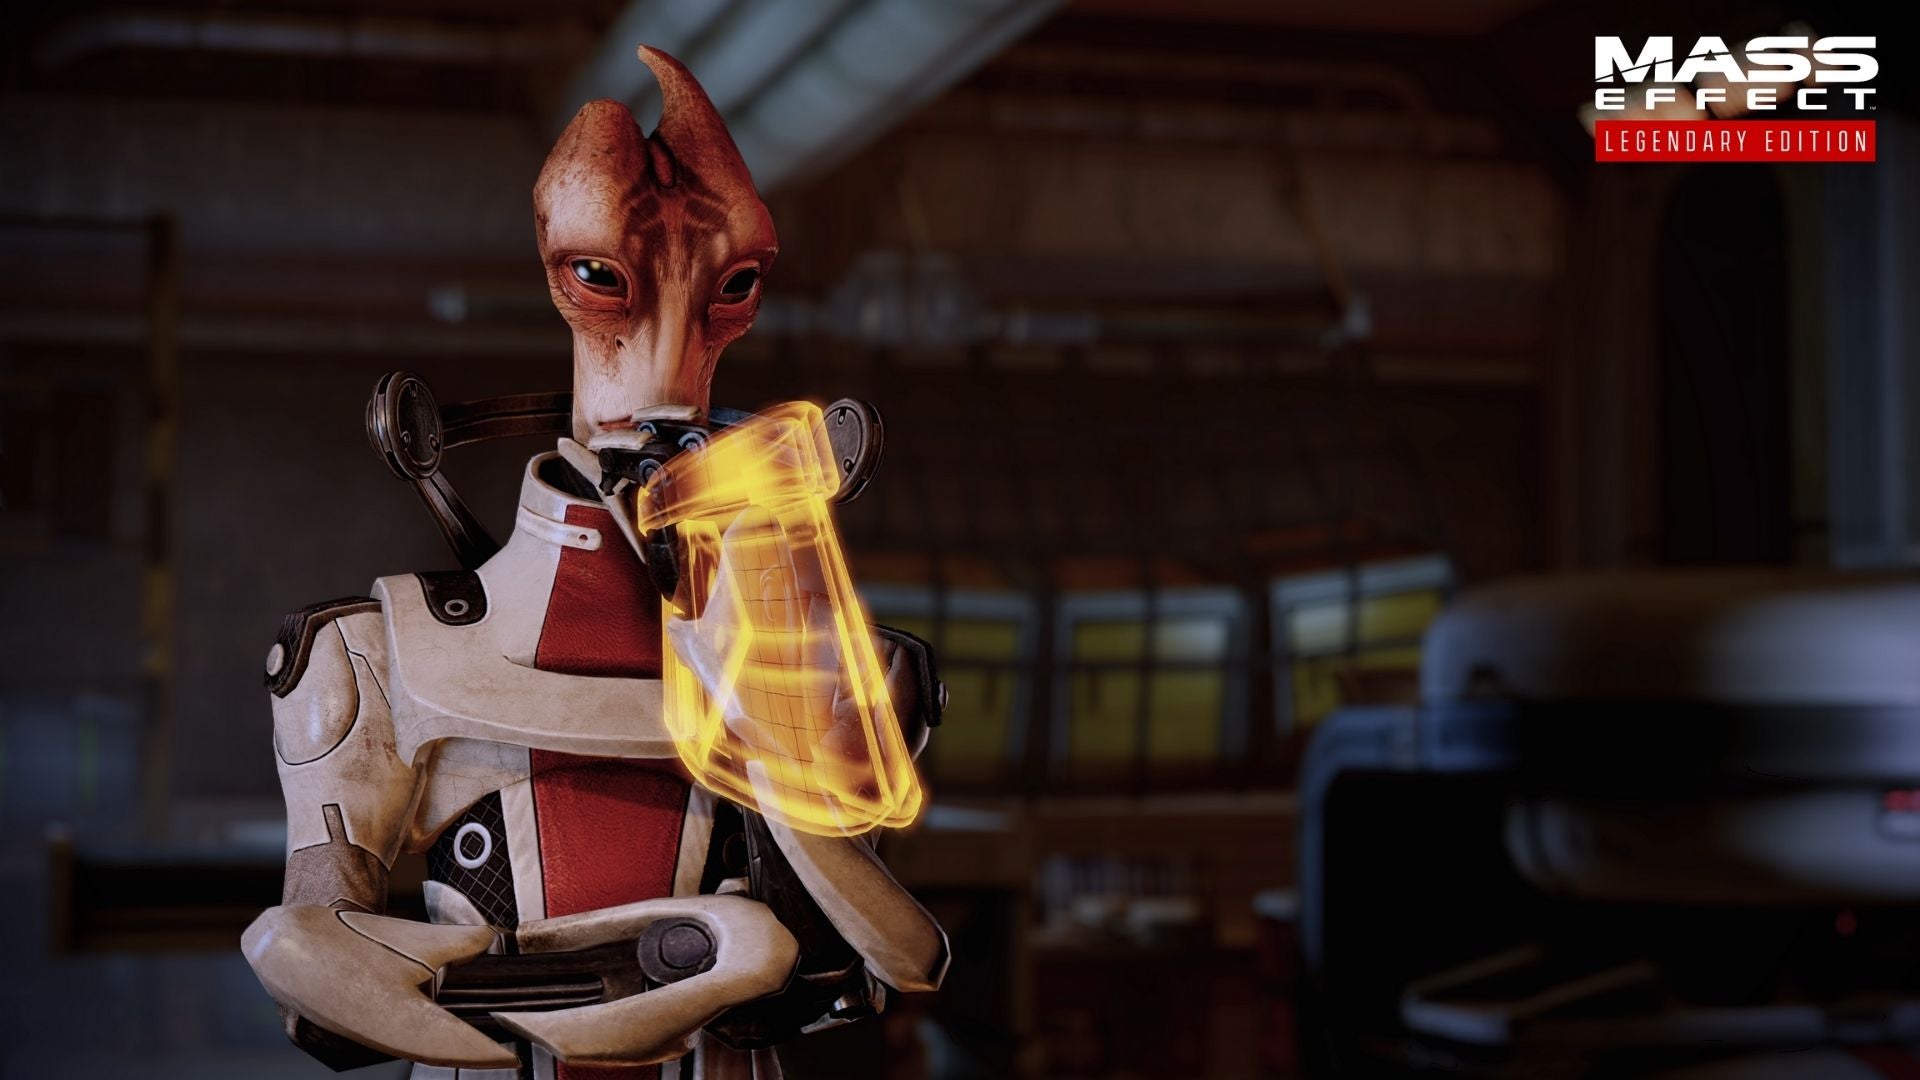 If you choose not to cure the genophage, I am legally allowed to kick you. It's the law. Look it up. (Screenshot: BioWare)